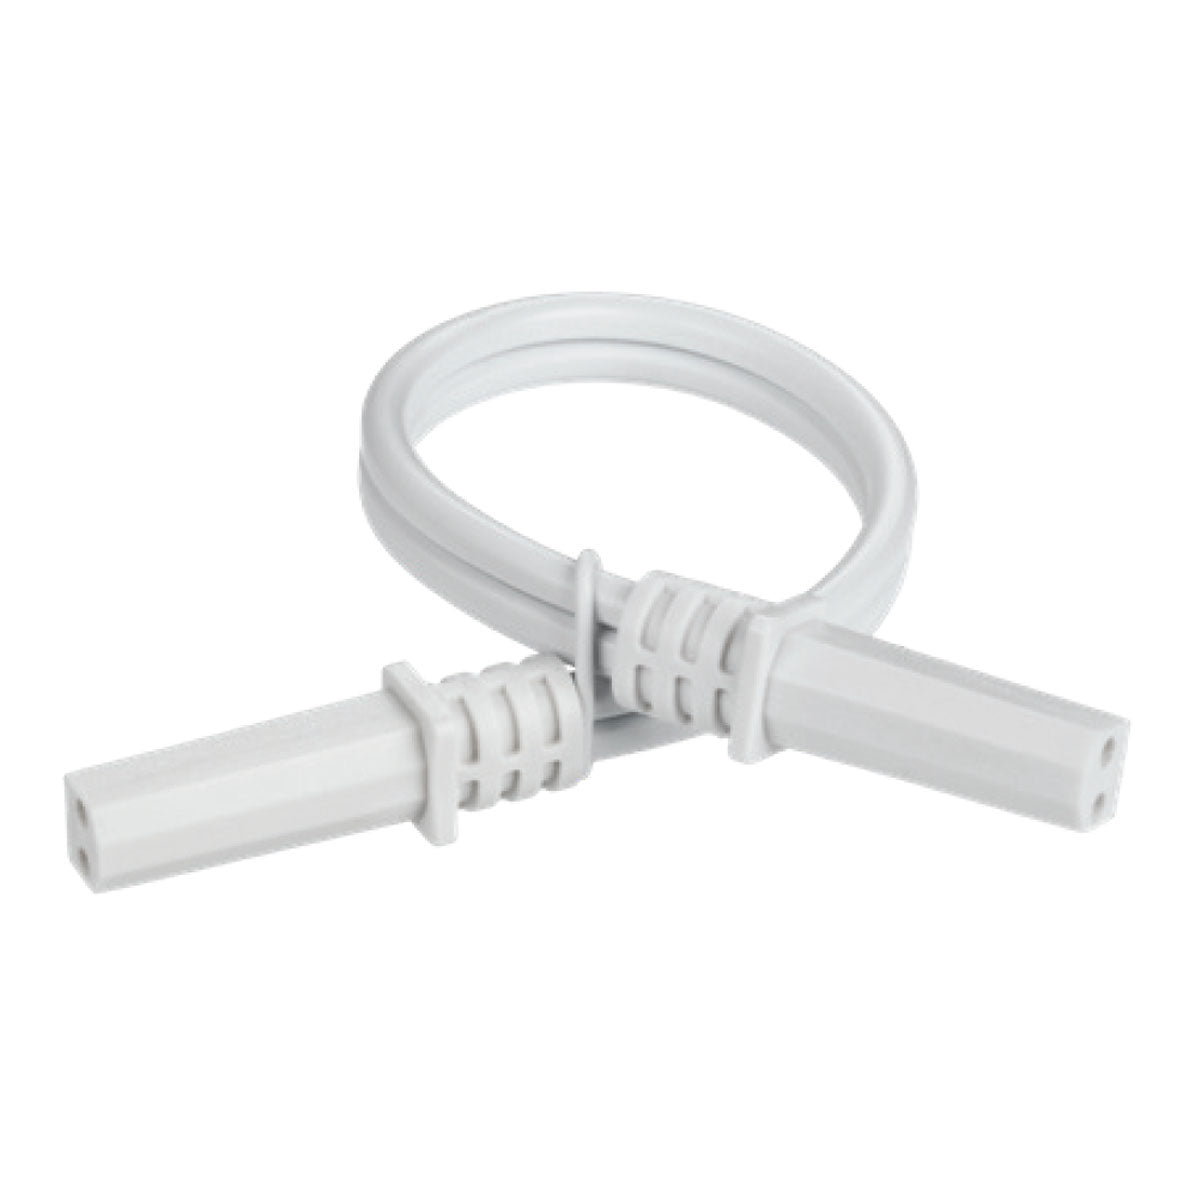 12in. Jumper with straight plugs for Microlink Bar light